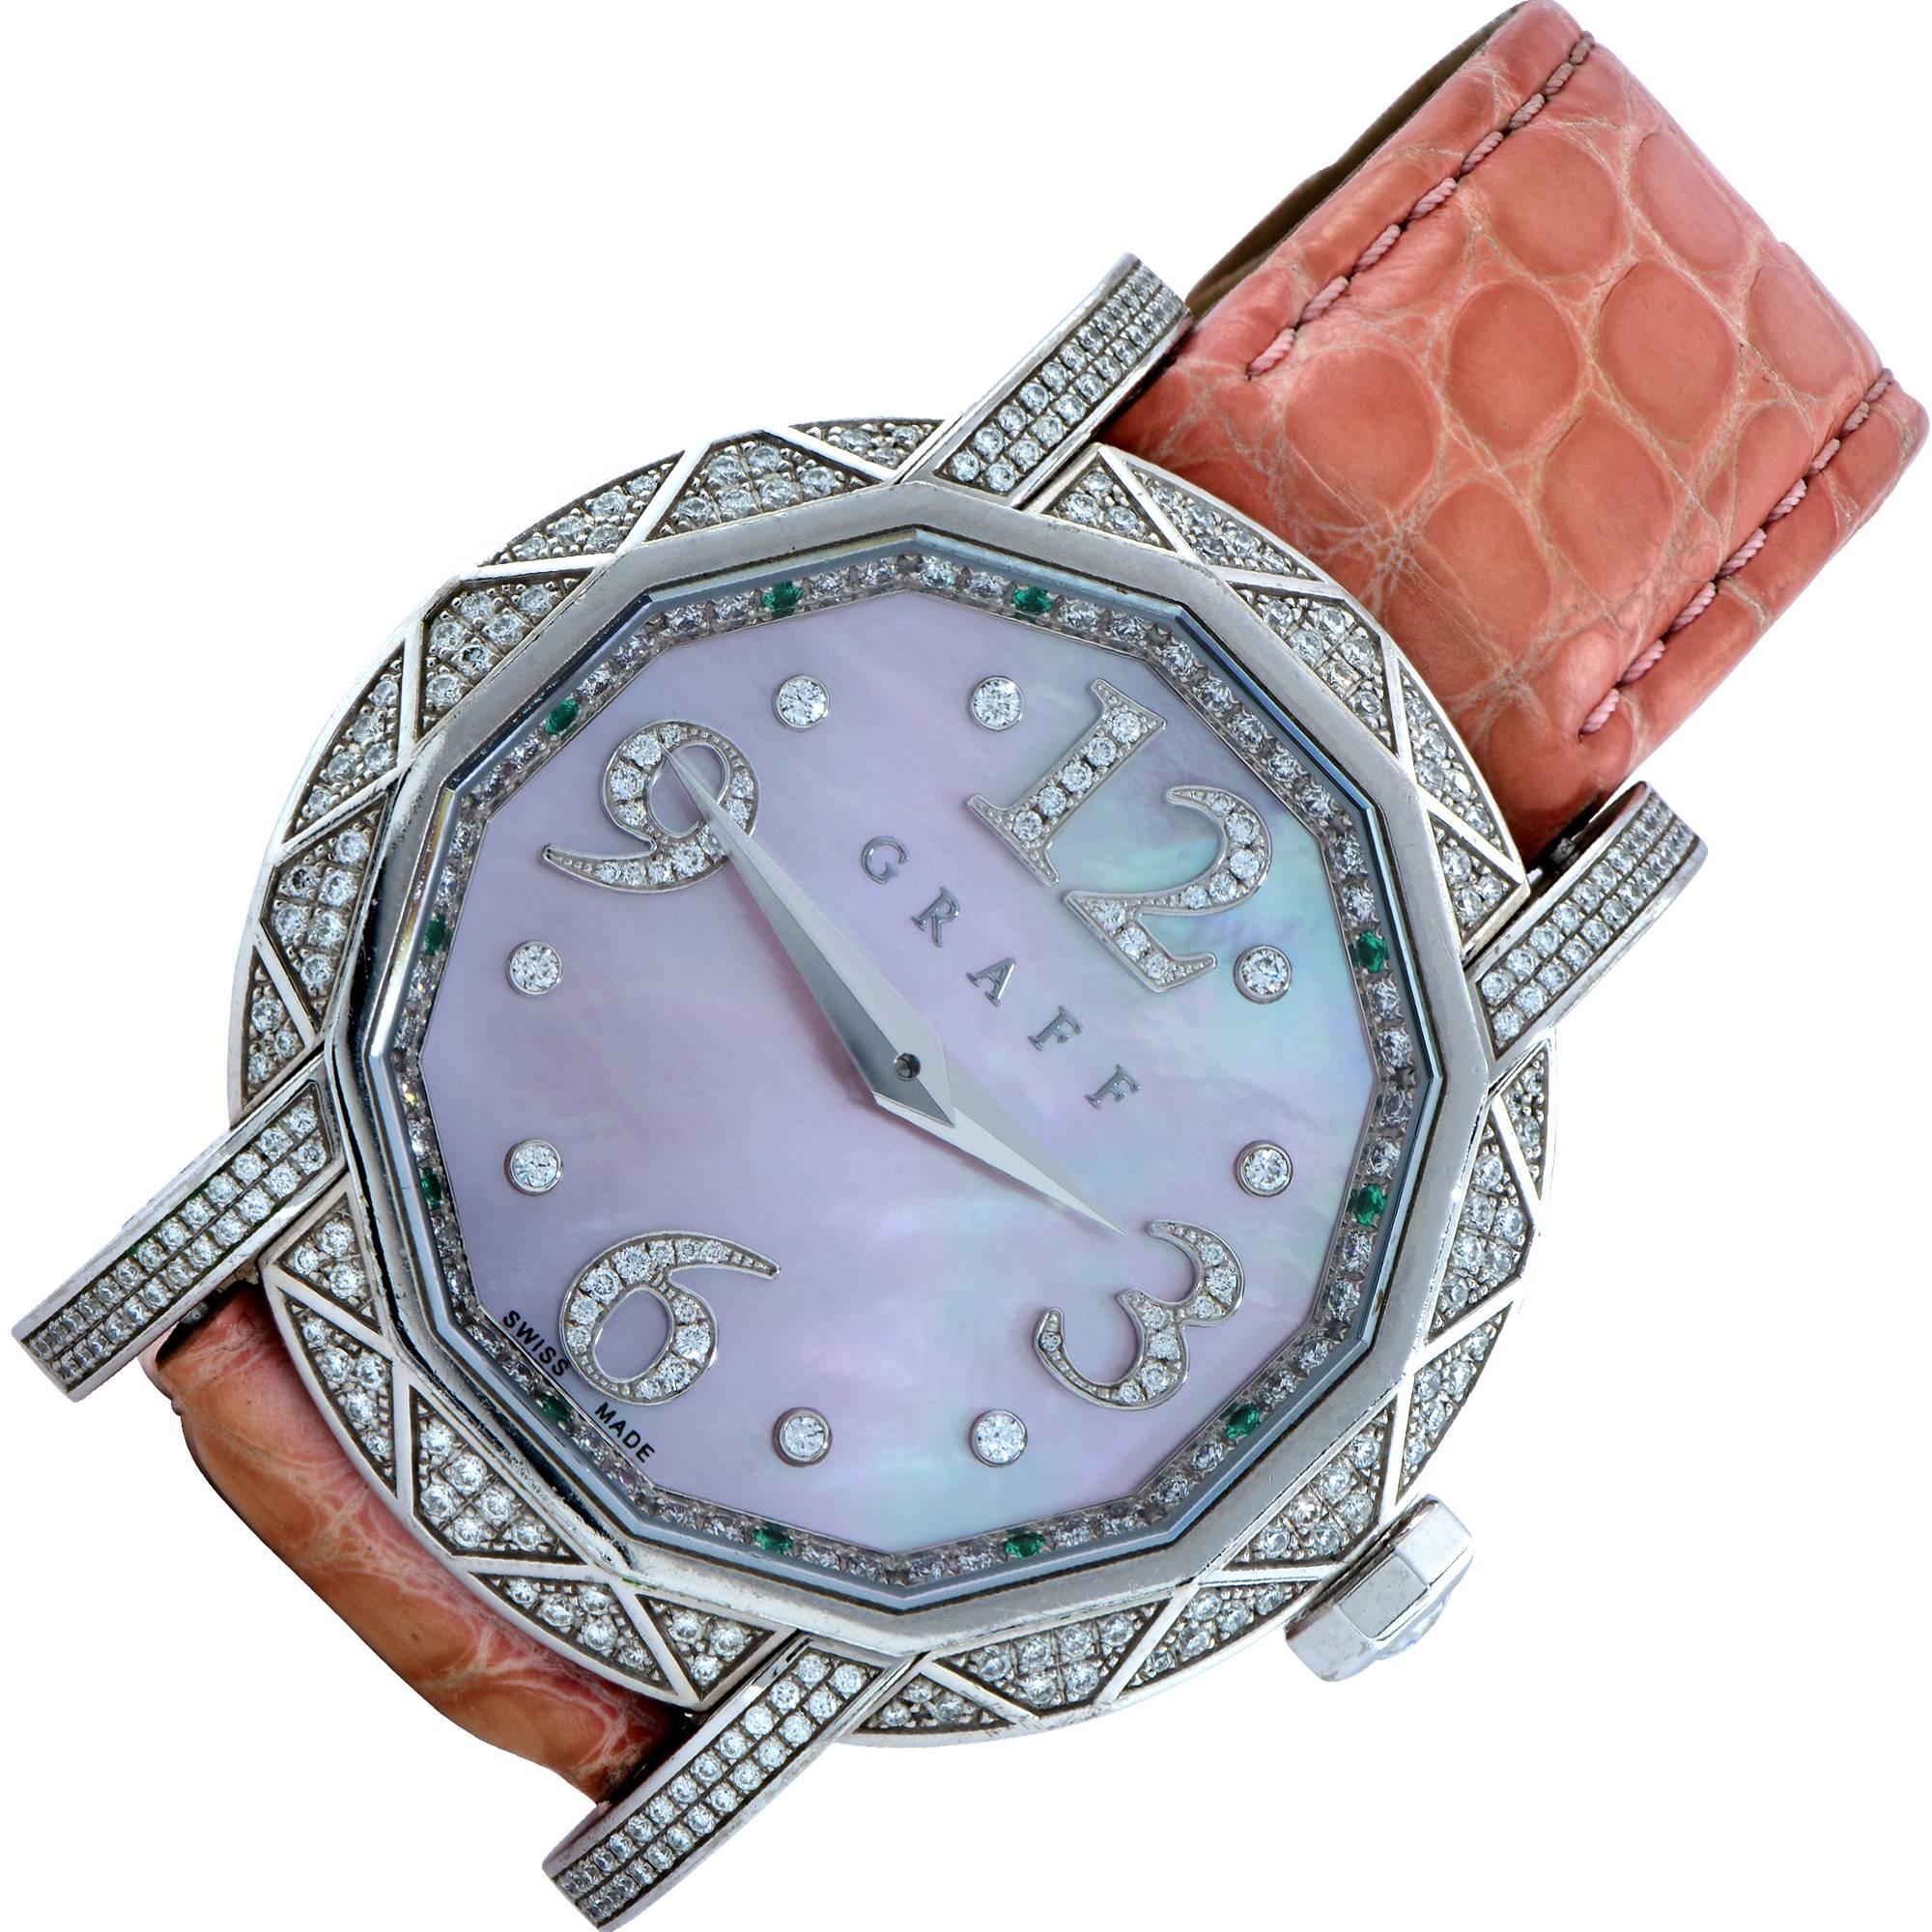 Exceedingly rare Graff Graffstar watch one of only 300 produced, stunningly crafted out of 18k white gold. Limited edition number 3 out of 300, the Graffstar collection is inspired by a perfectly cut diamond. This watch showcases a pink mother of